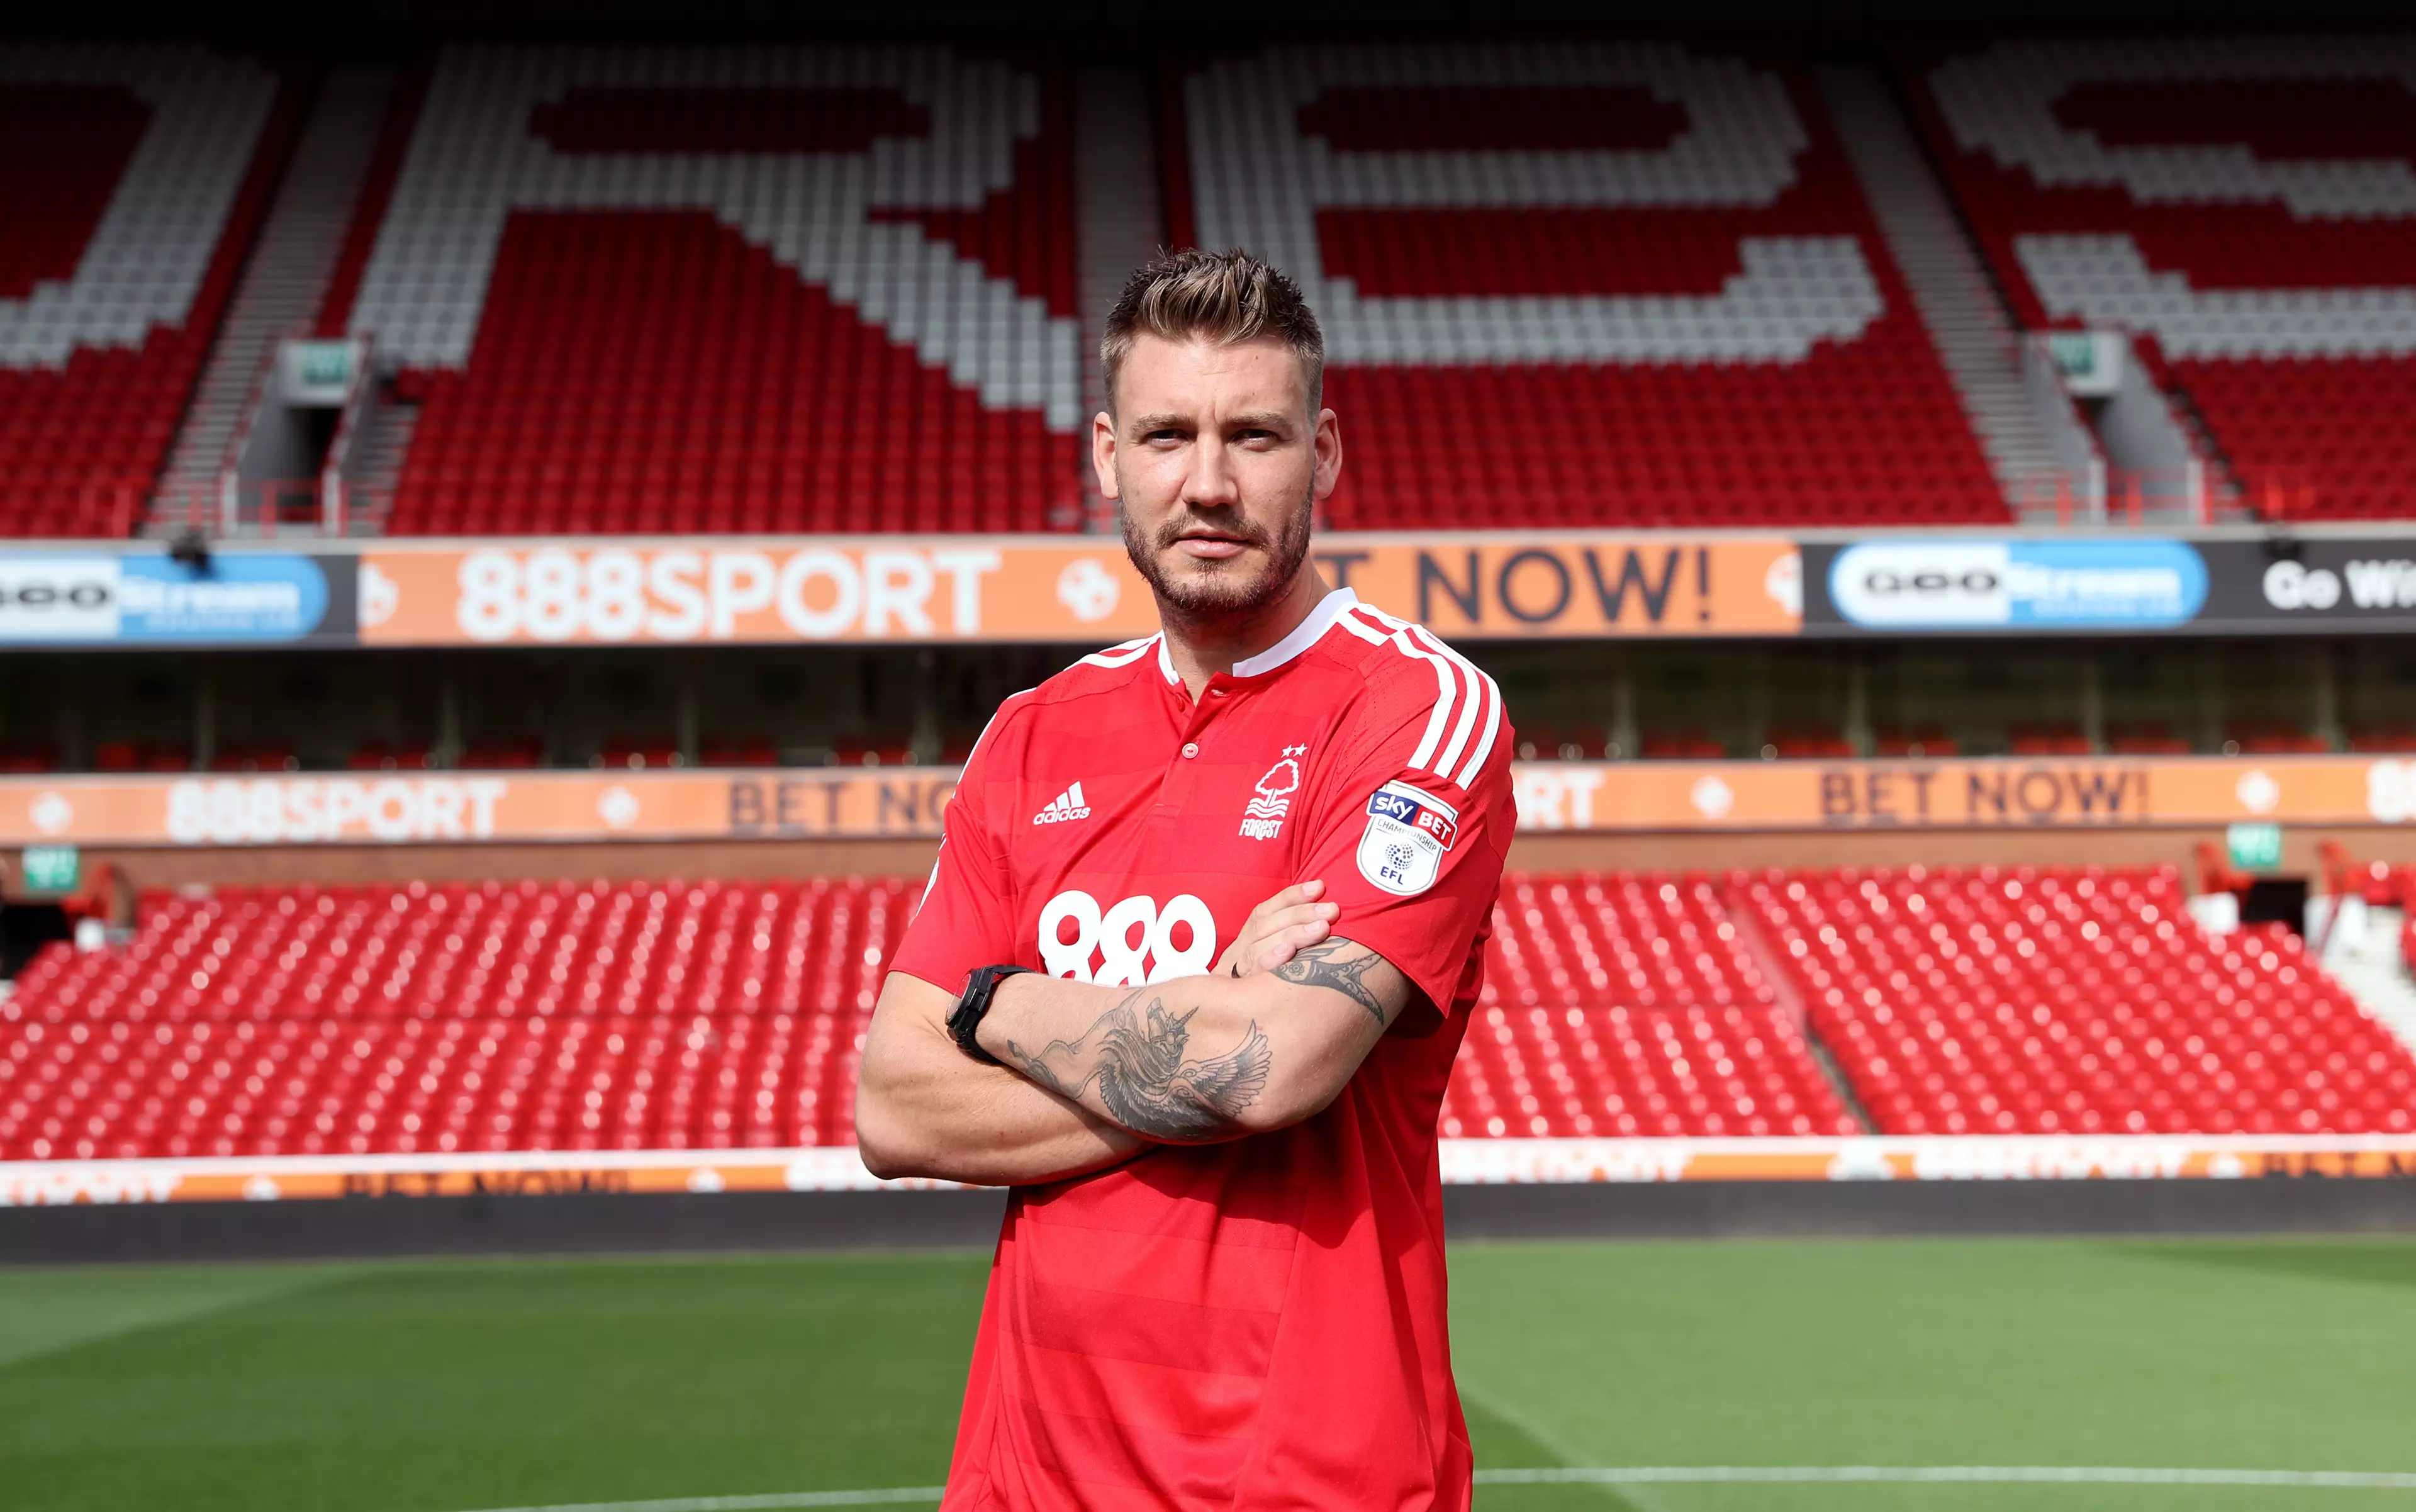 Lord Bendtner's Last Two Goals In England Were Separated By Exactly ONE THOUSAND DAYS 